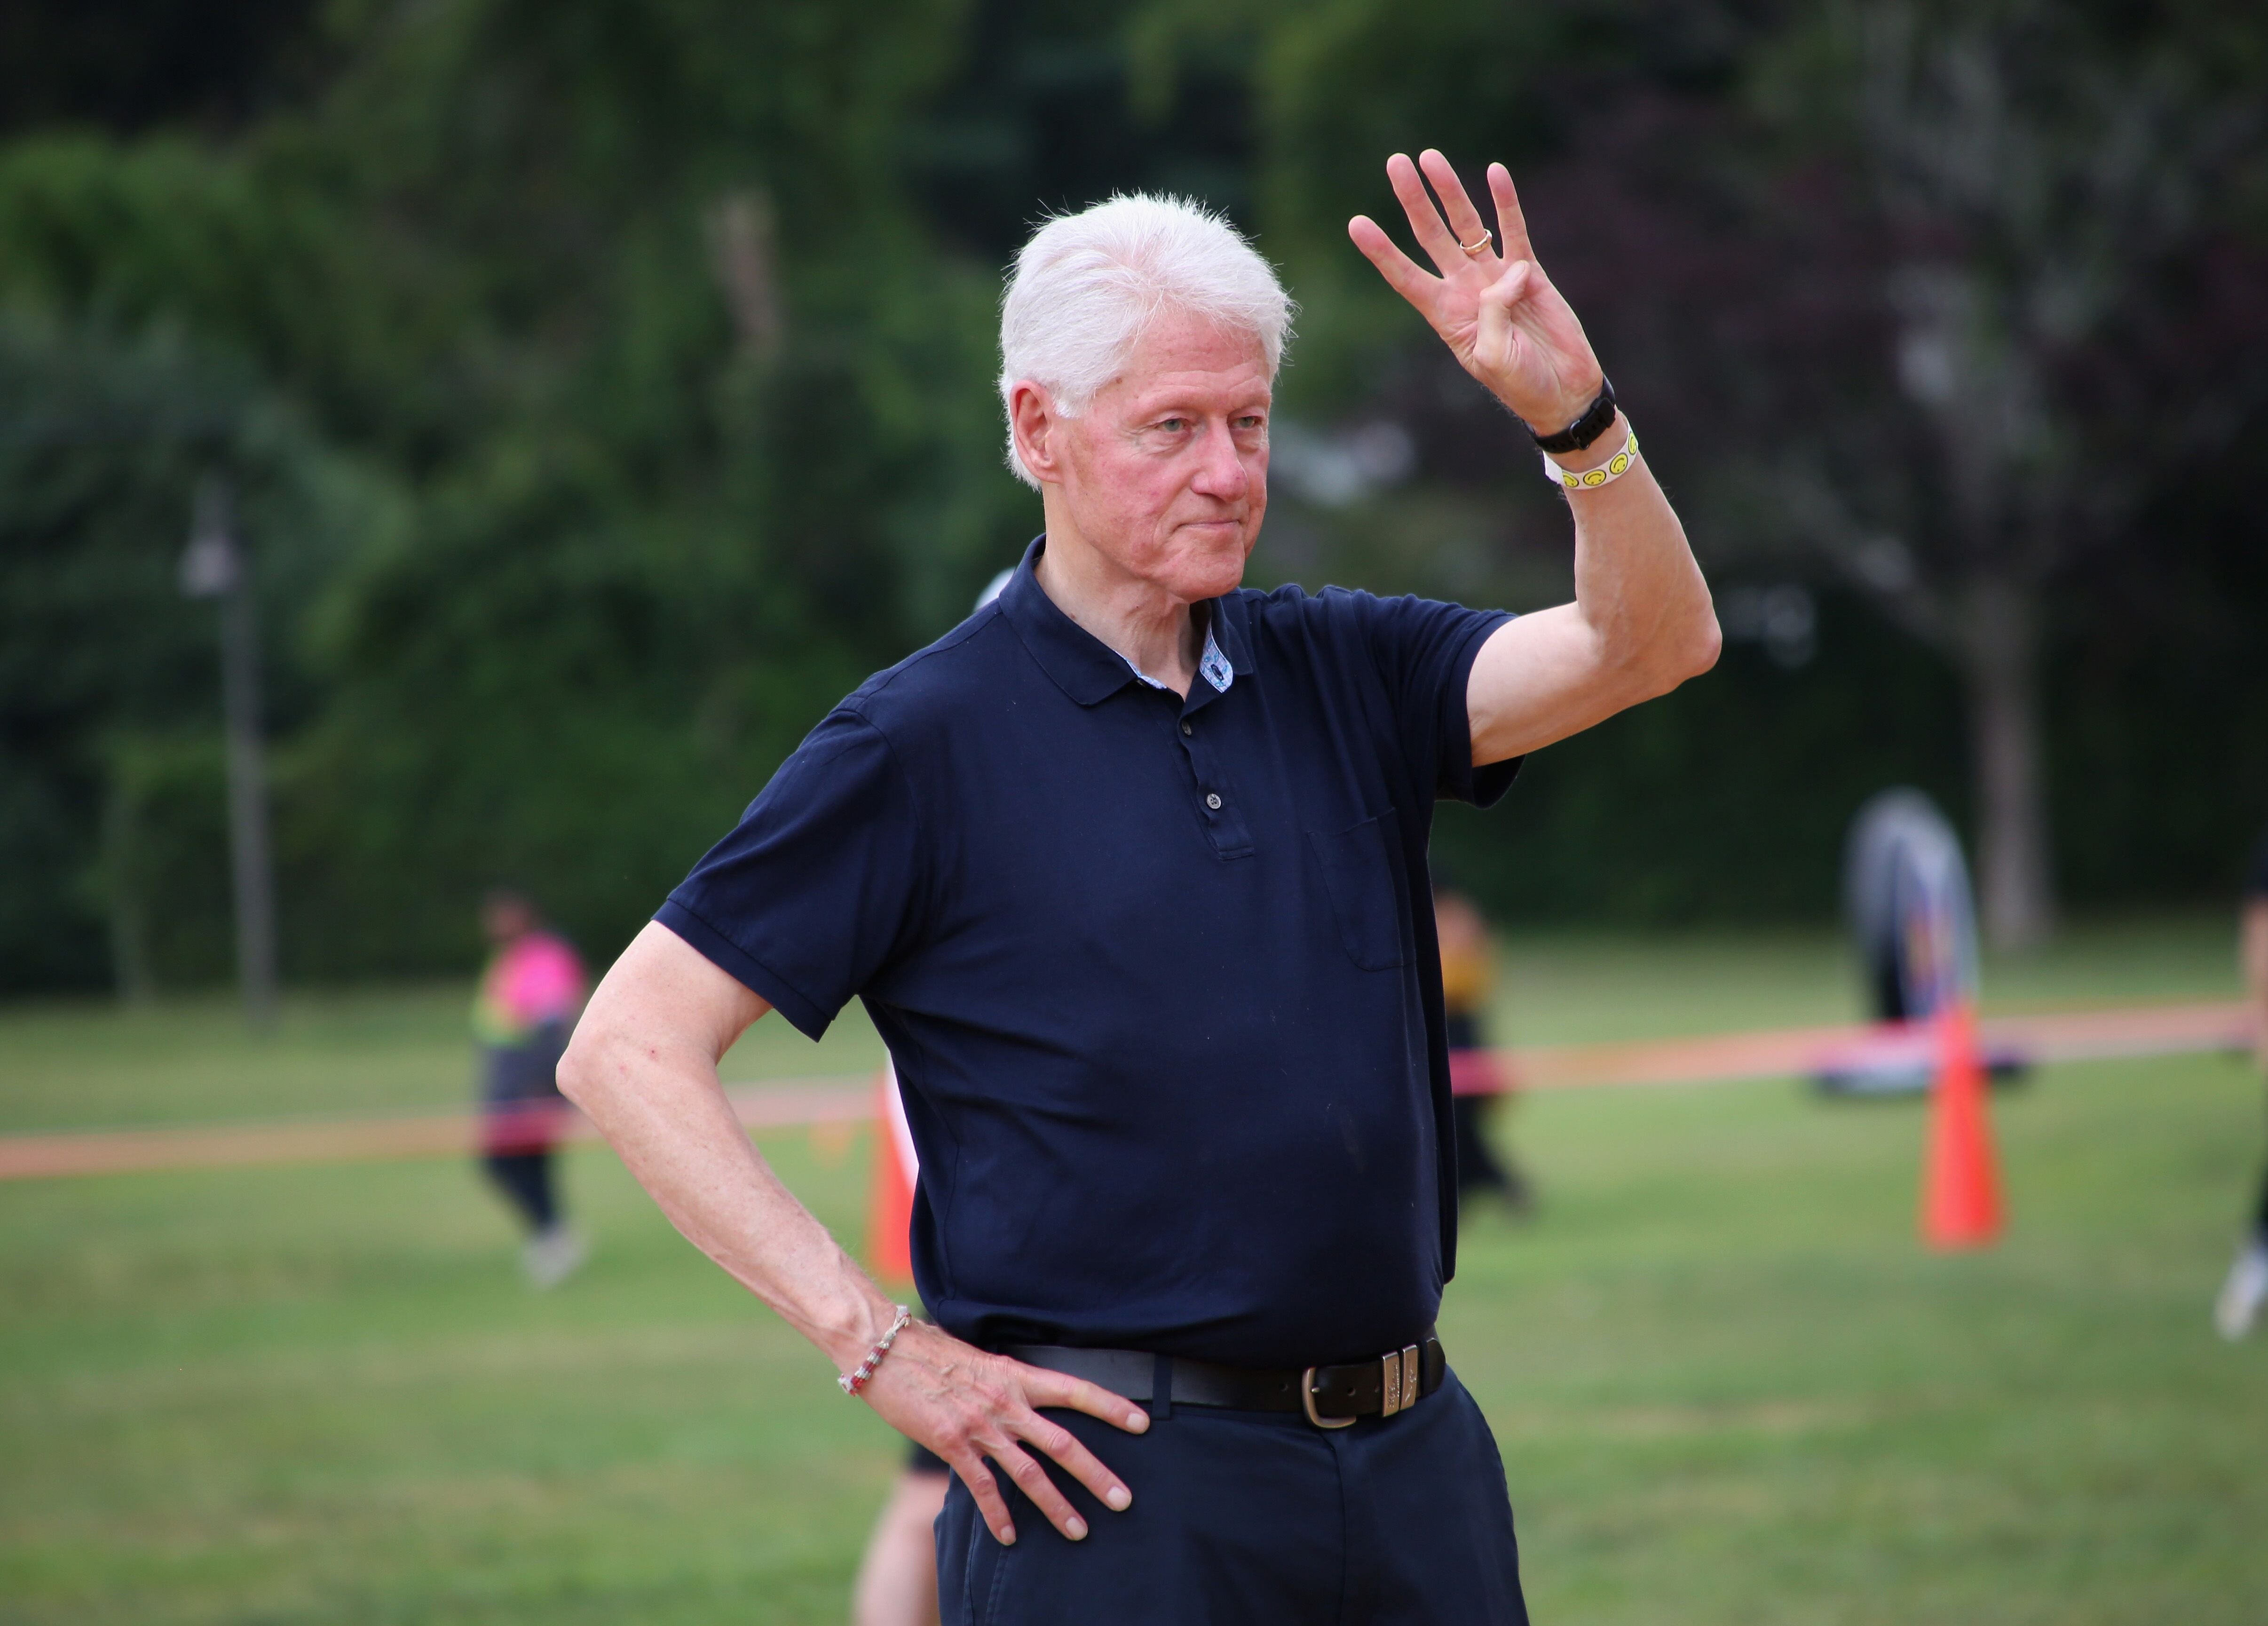 Bill Clinton at the East Hampton Artists and Writers Charity Softball Game in 2019 | Source: Getty Images